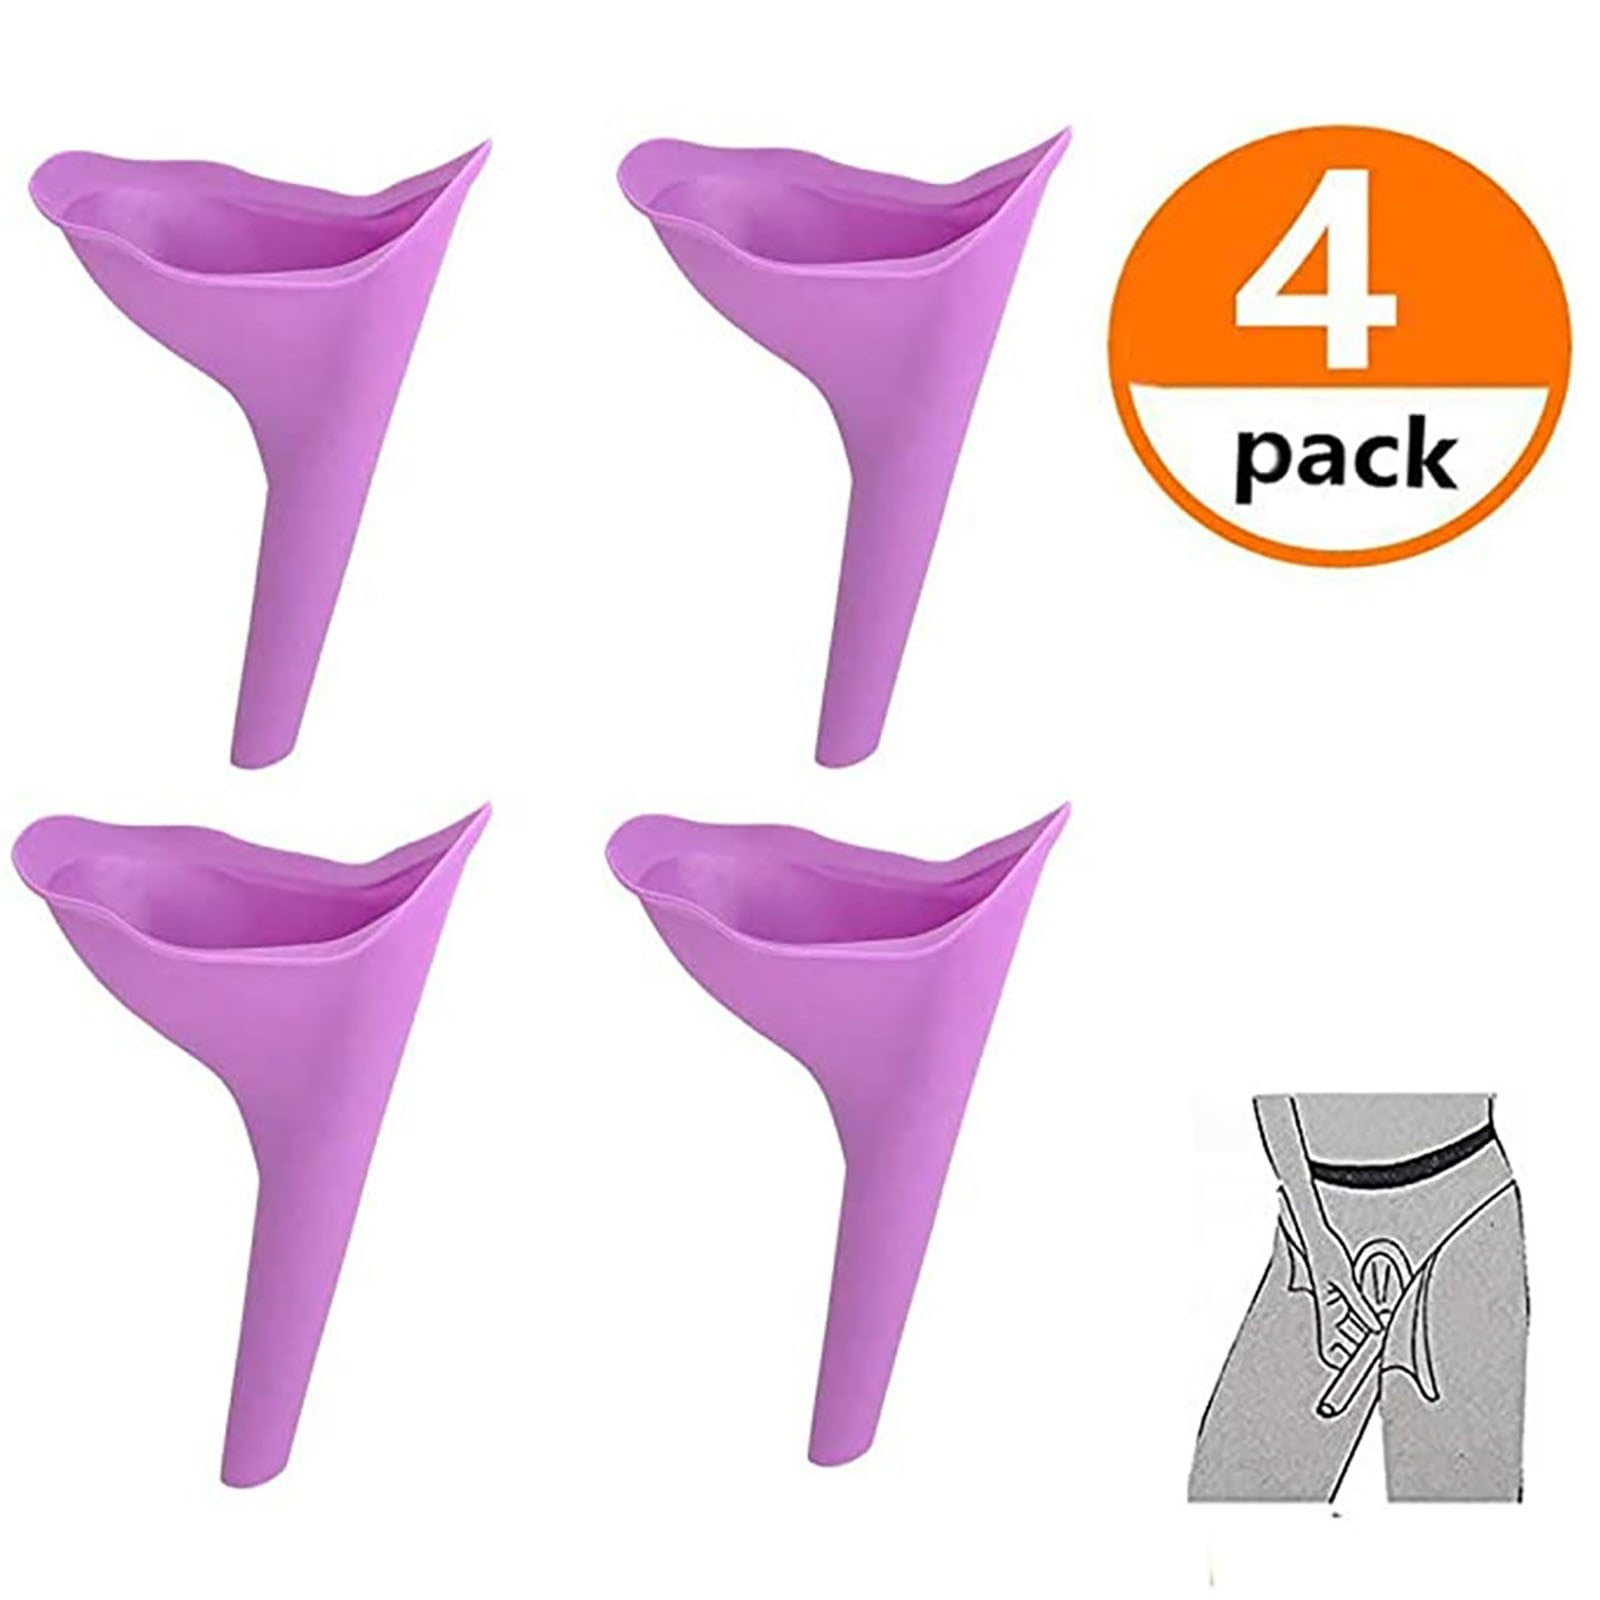 1/2Pcs Fashions Woman Lady Female Urinal Funnel Urinal Camping Portable Travel 